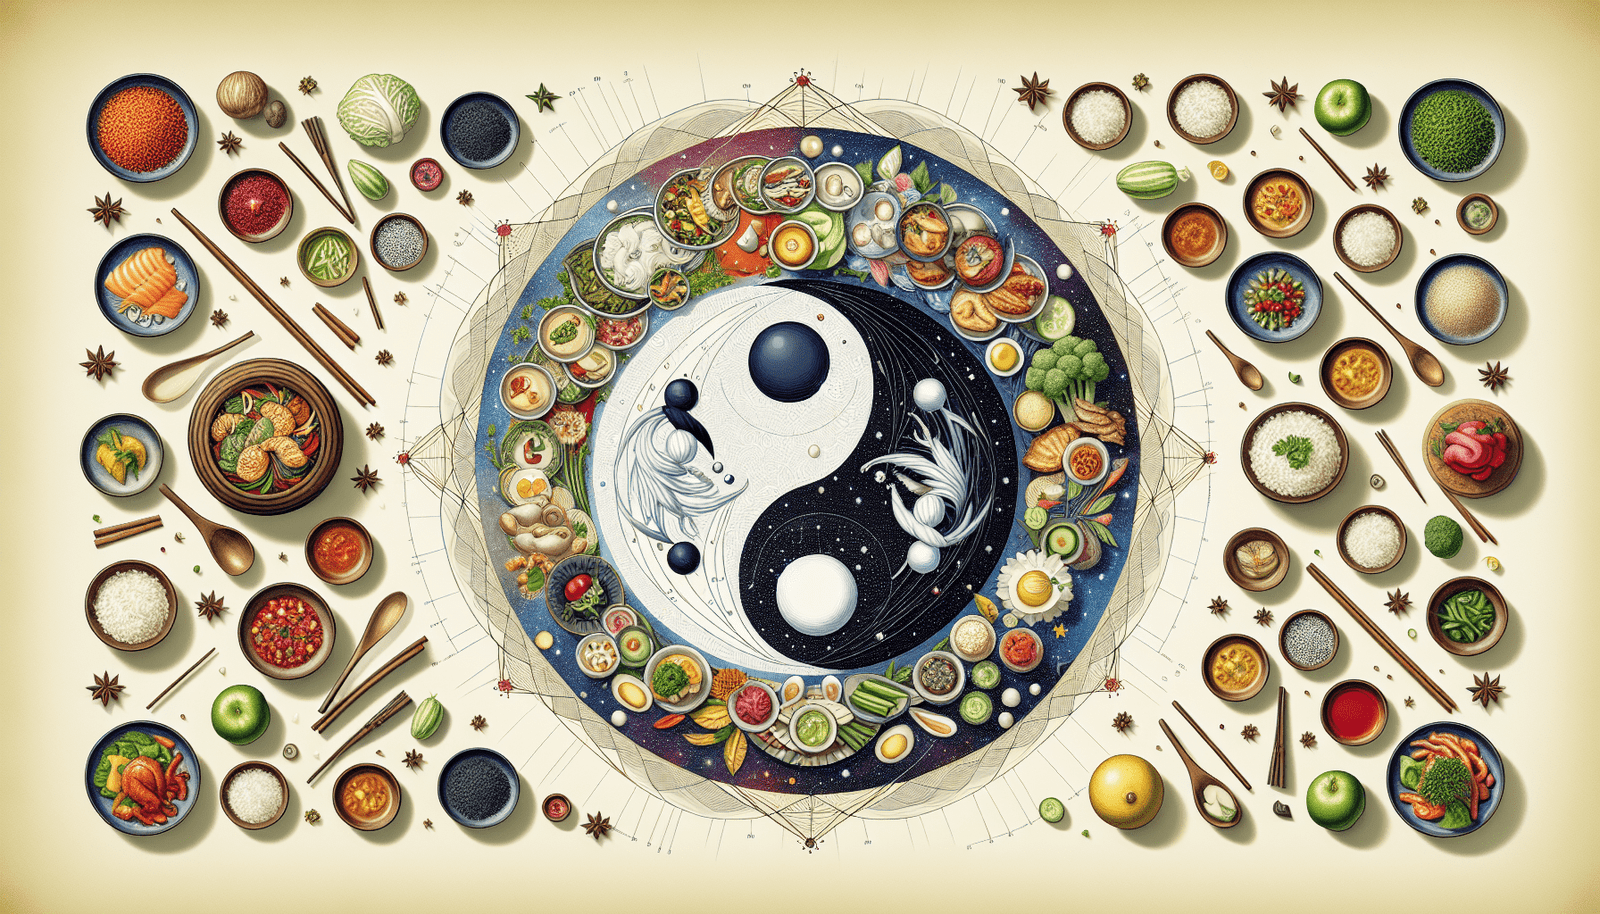 How Does The Philosophy Of Balance Influence Korean Cooking?